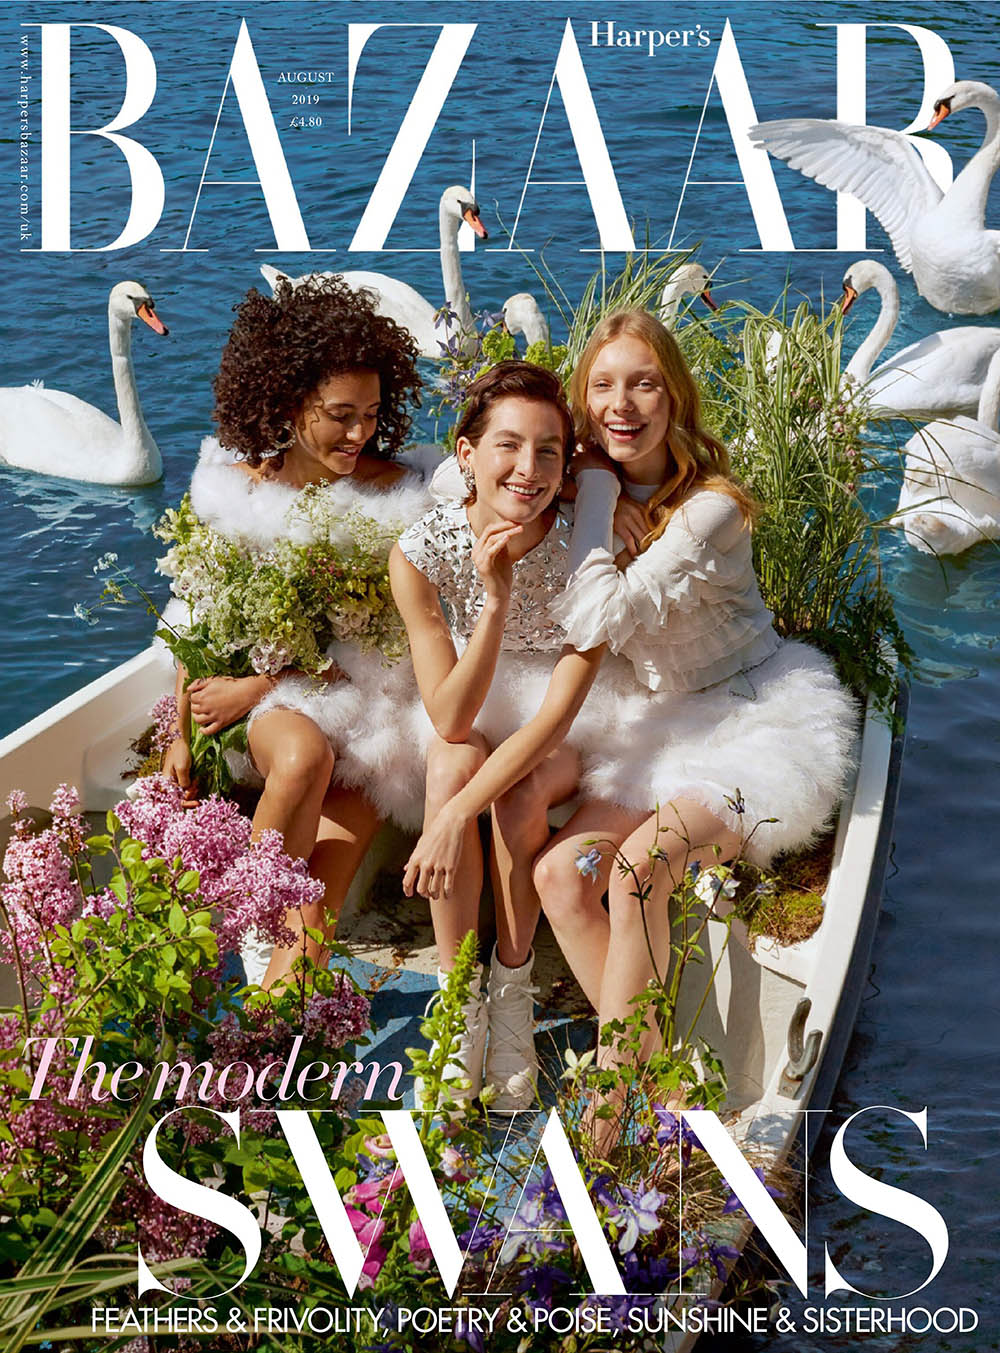 Mélodie Vaxelaire, Heather Kemesky and Demy de Vries cover Harper’s Bazaar UK August 2019 by Agata Pospieszynska